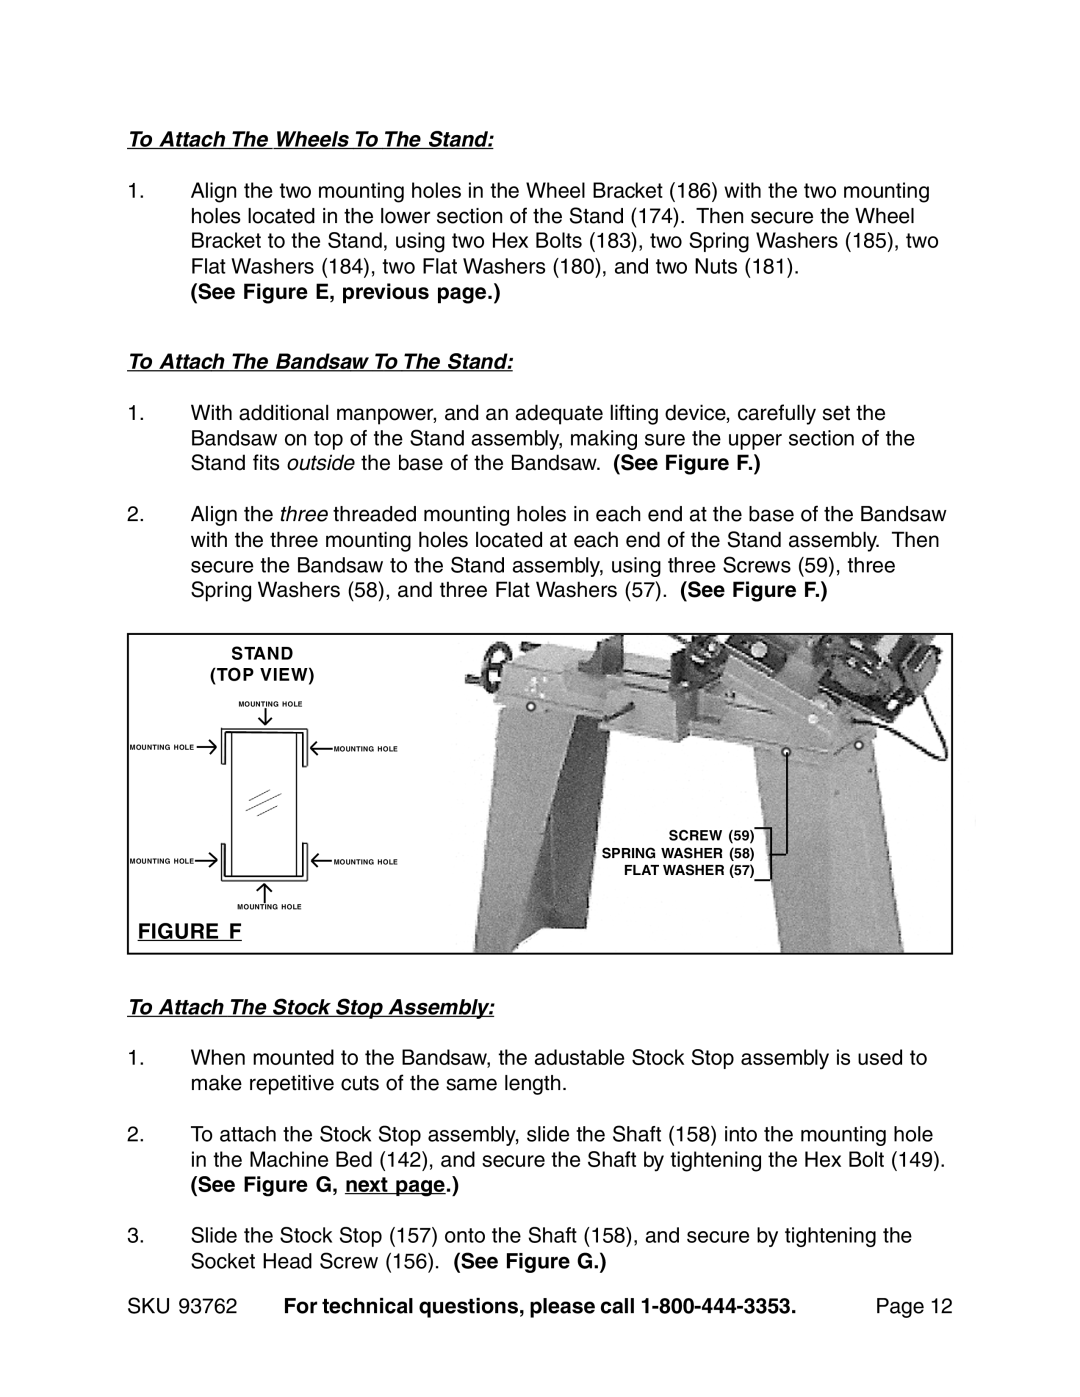 Harbor Freight Tools 93762 operating instructions To Attach The Wheels To The Stand, See Figure E, previous page, Figure F 